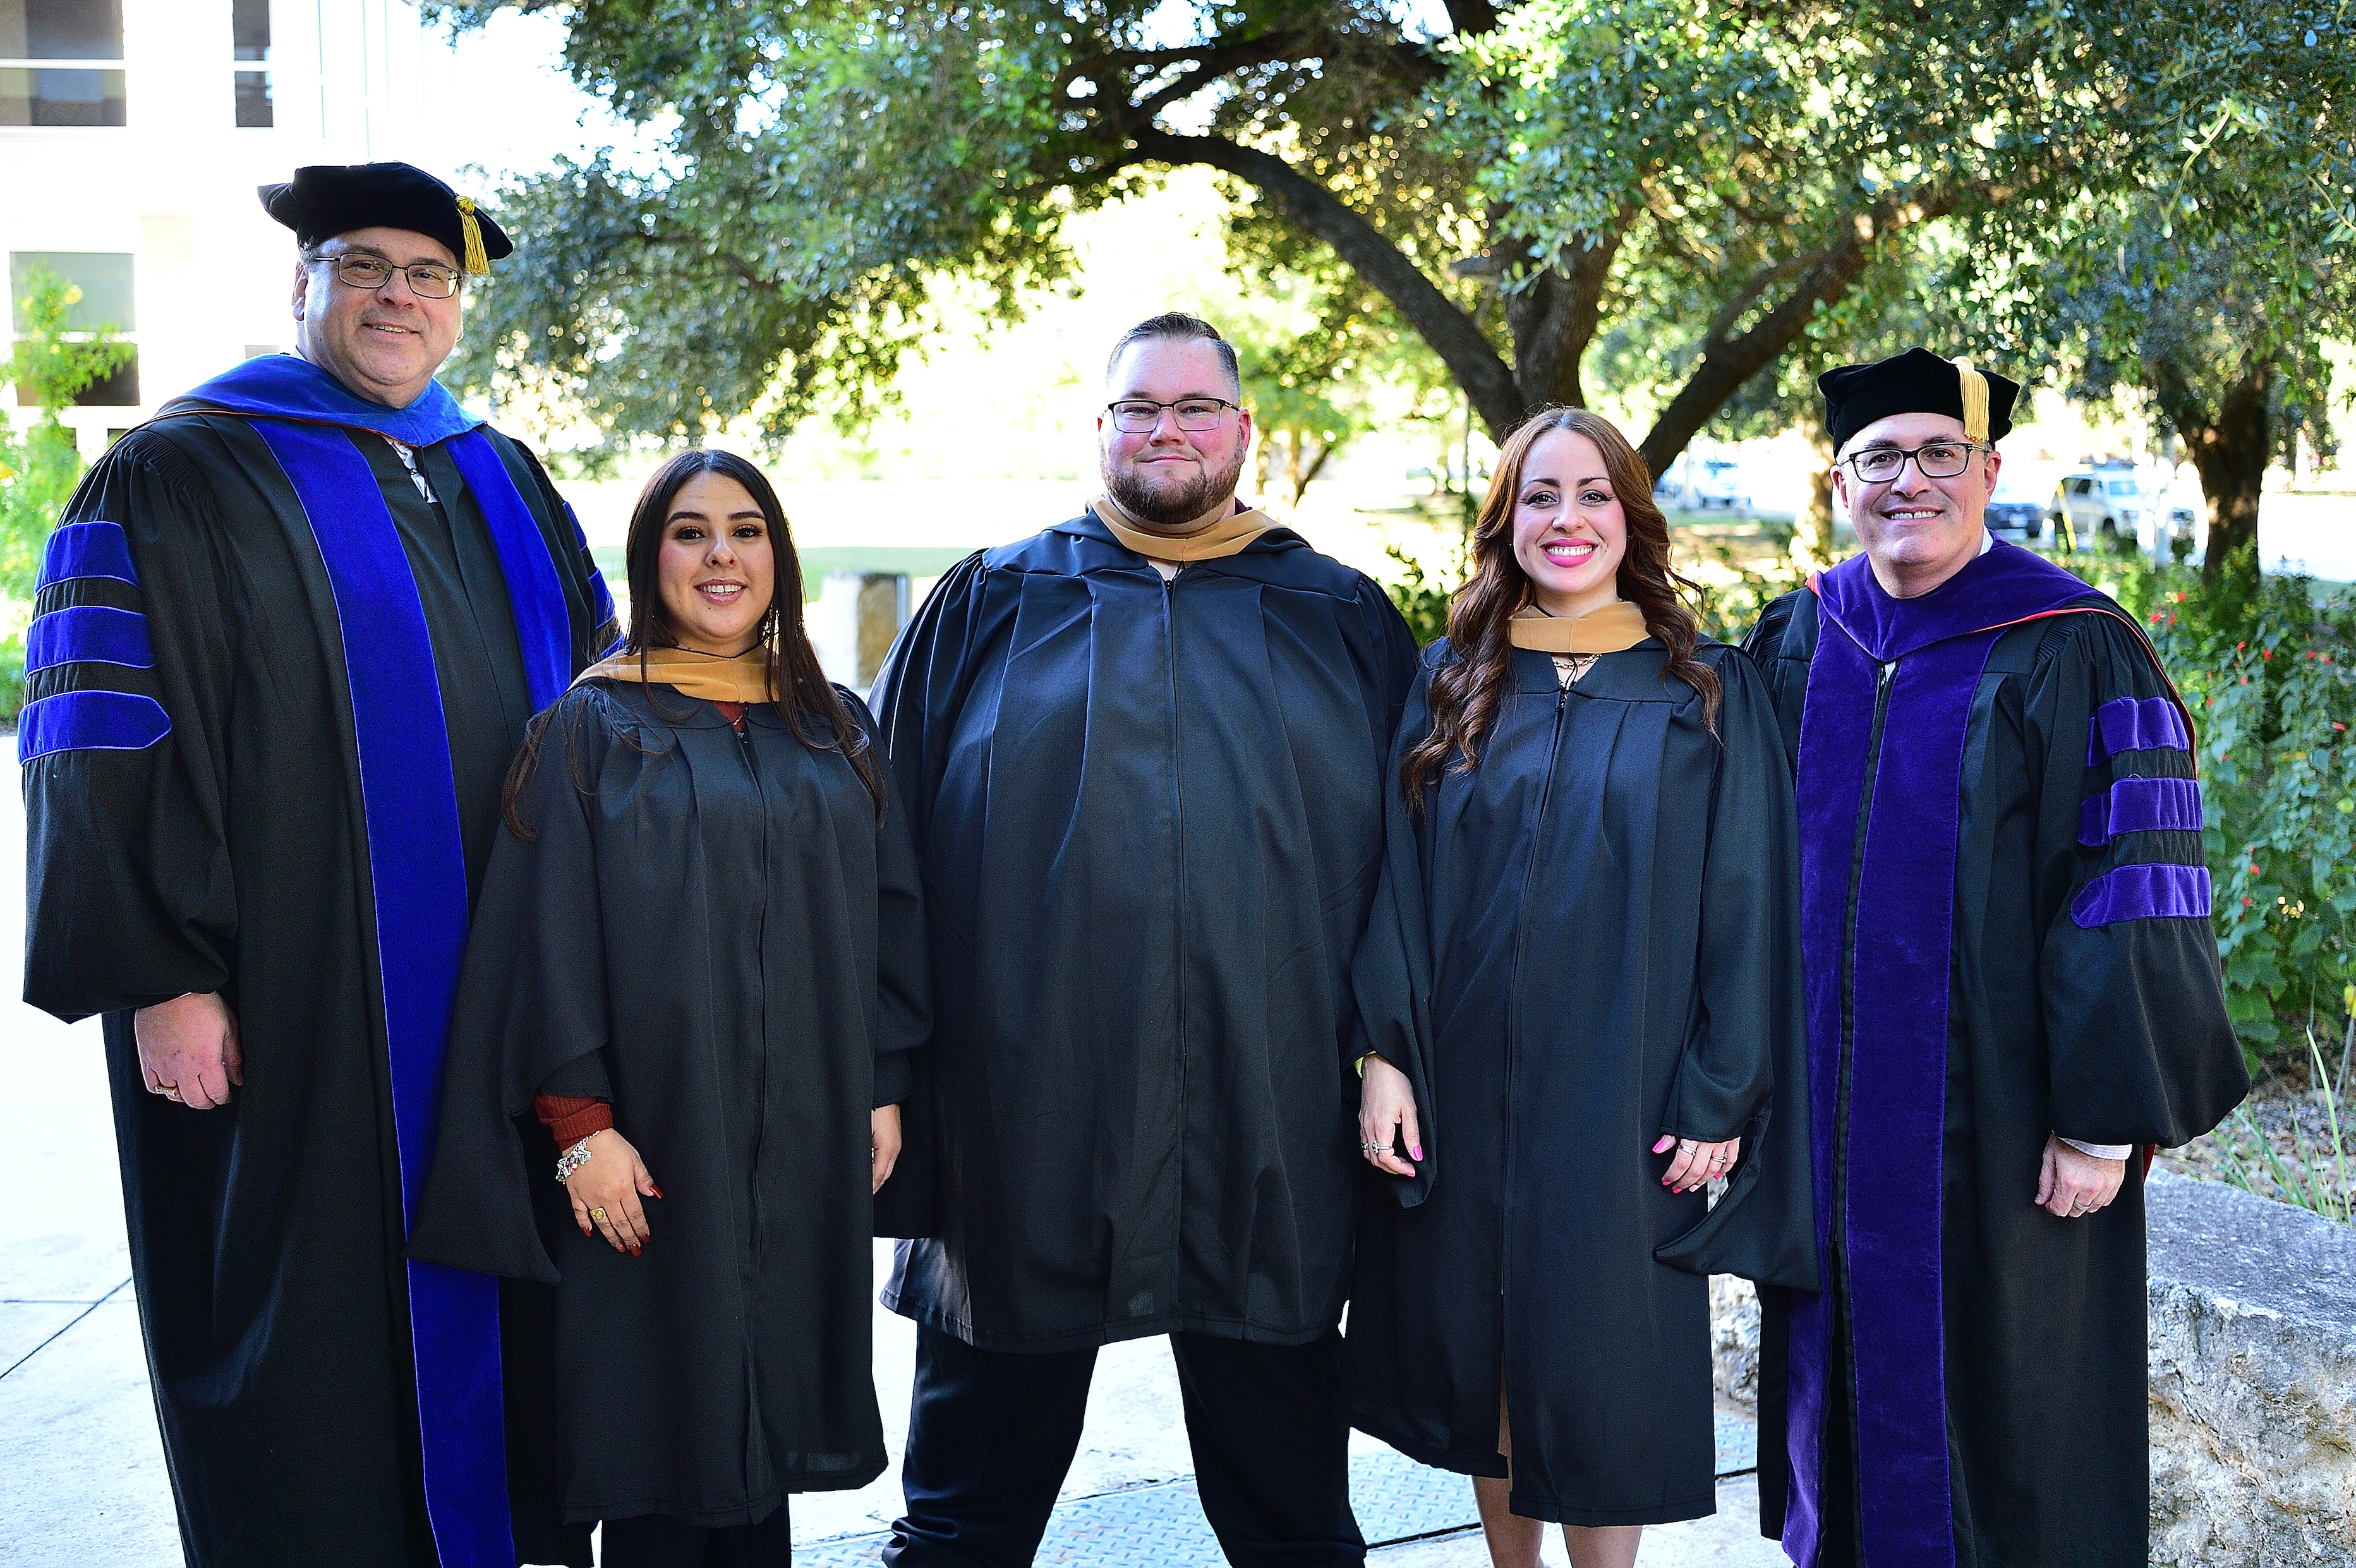 TLU’s MBA Class of 2023 graduates pictured with their professors